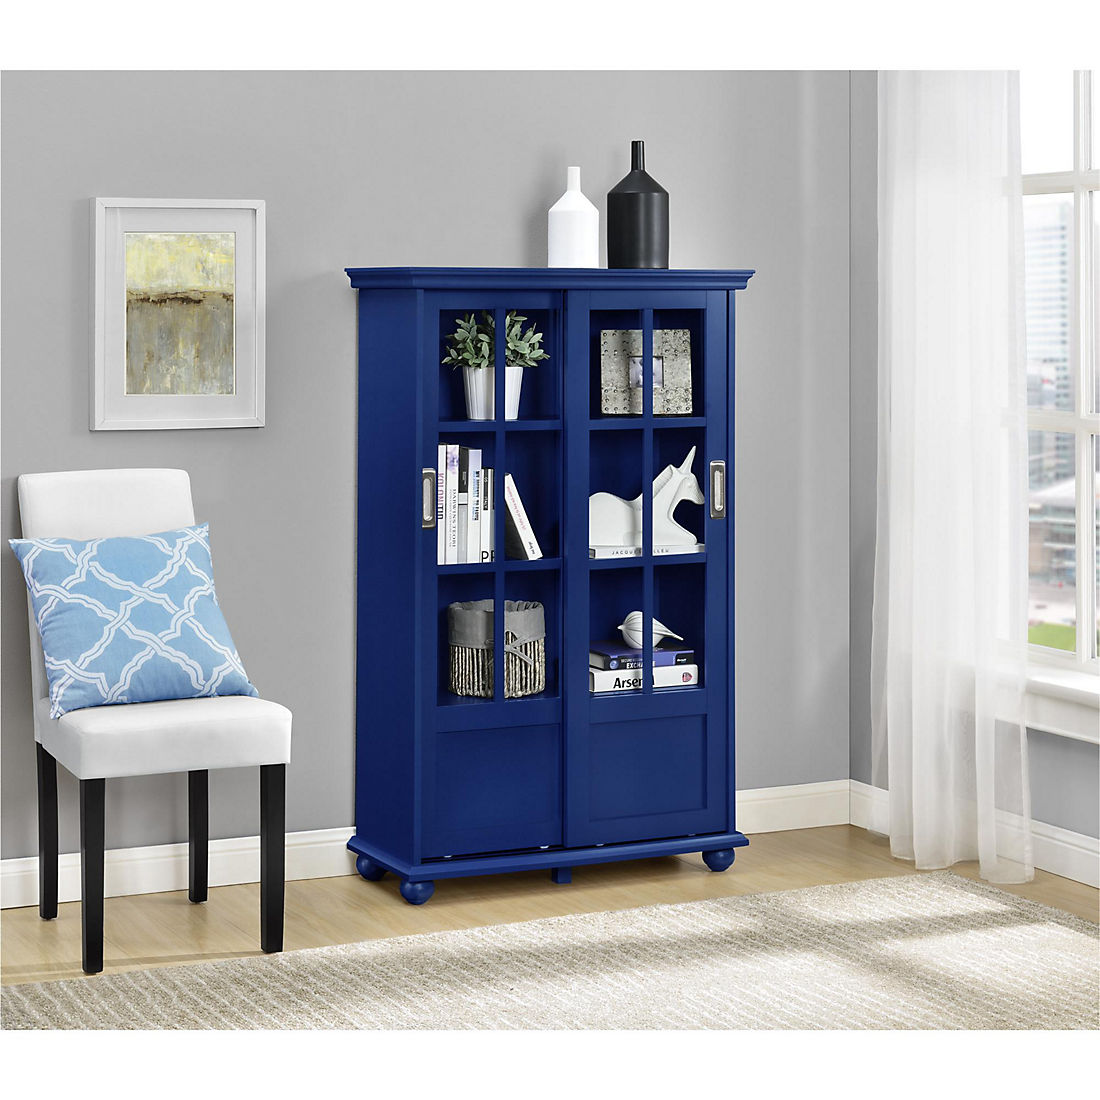 Ameriwood Home Aaron Lane Bookcase With Sliding Glass Doors Blue